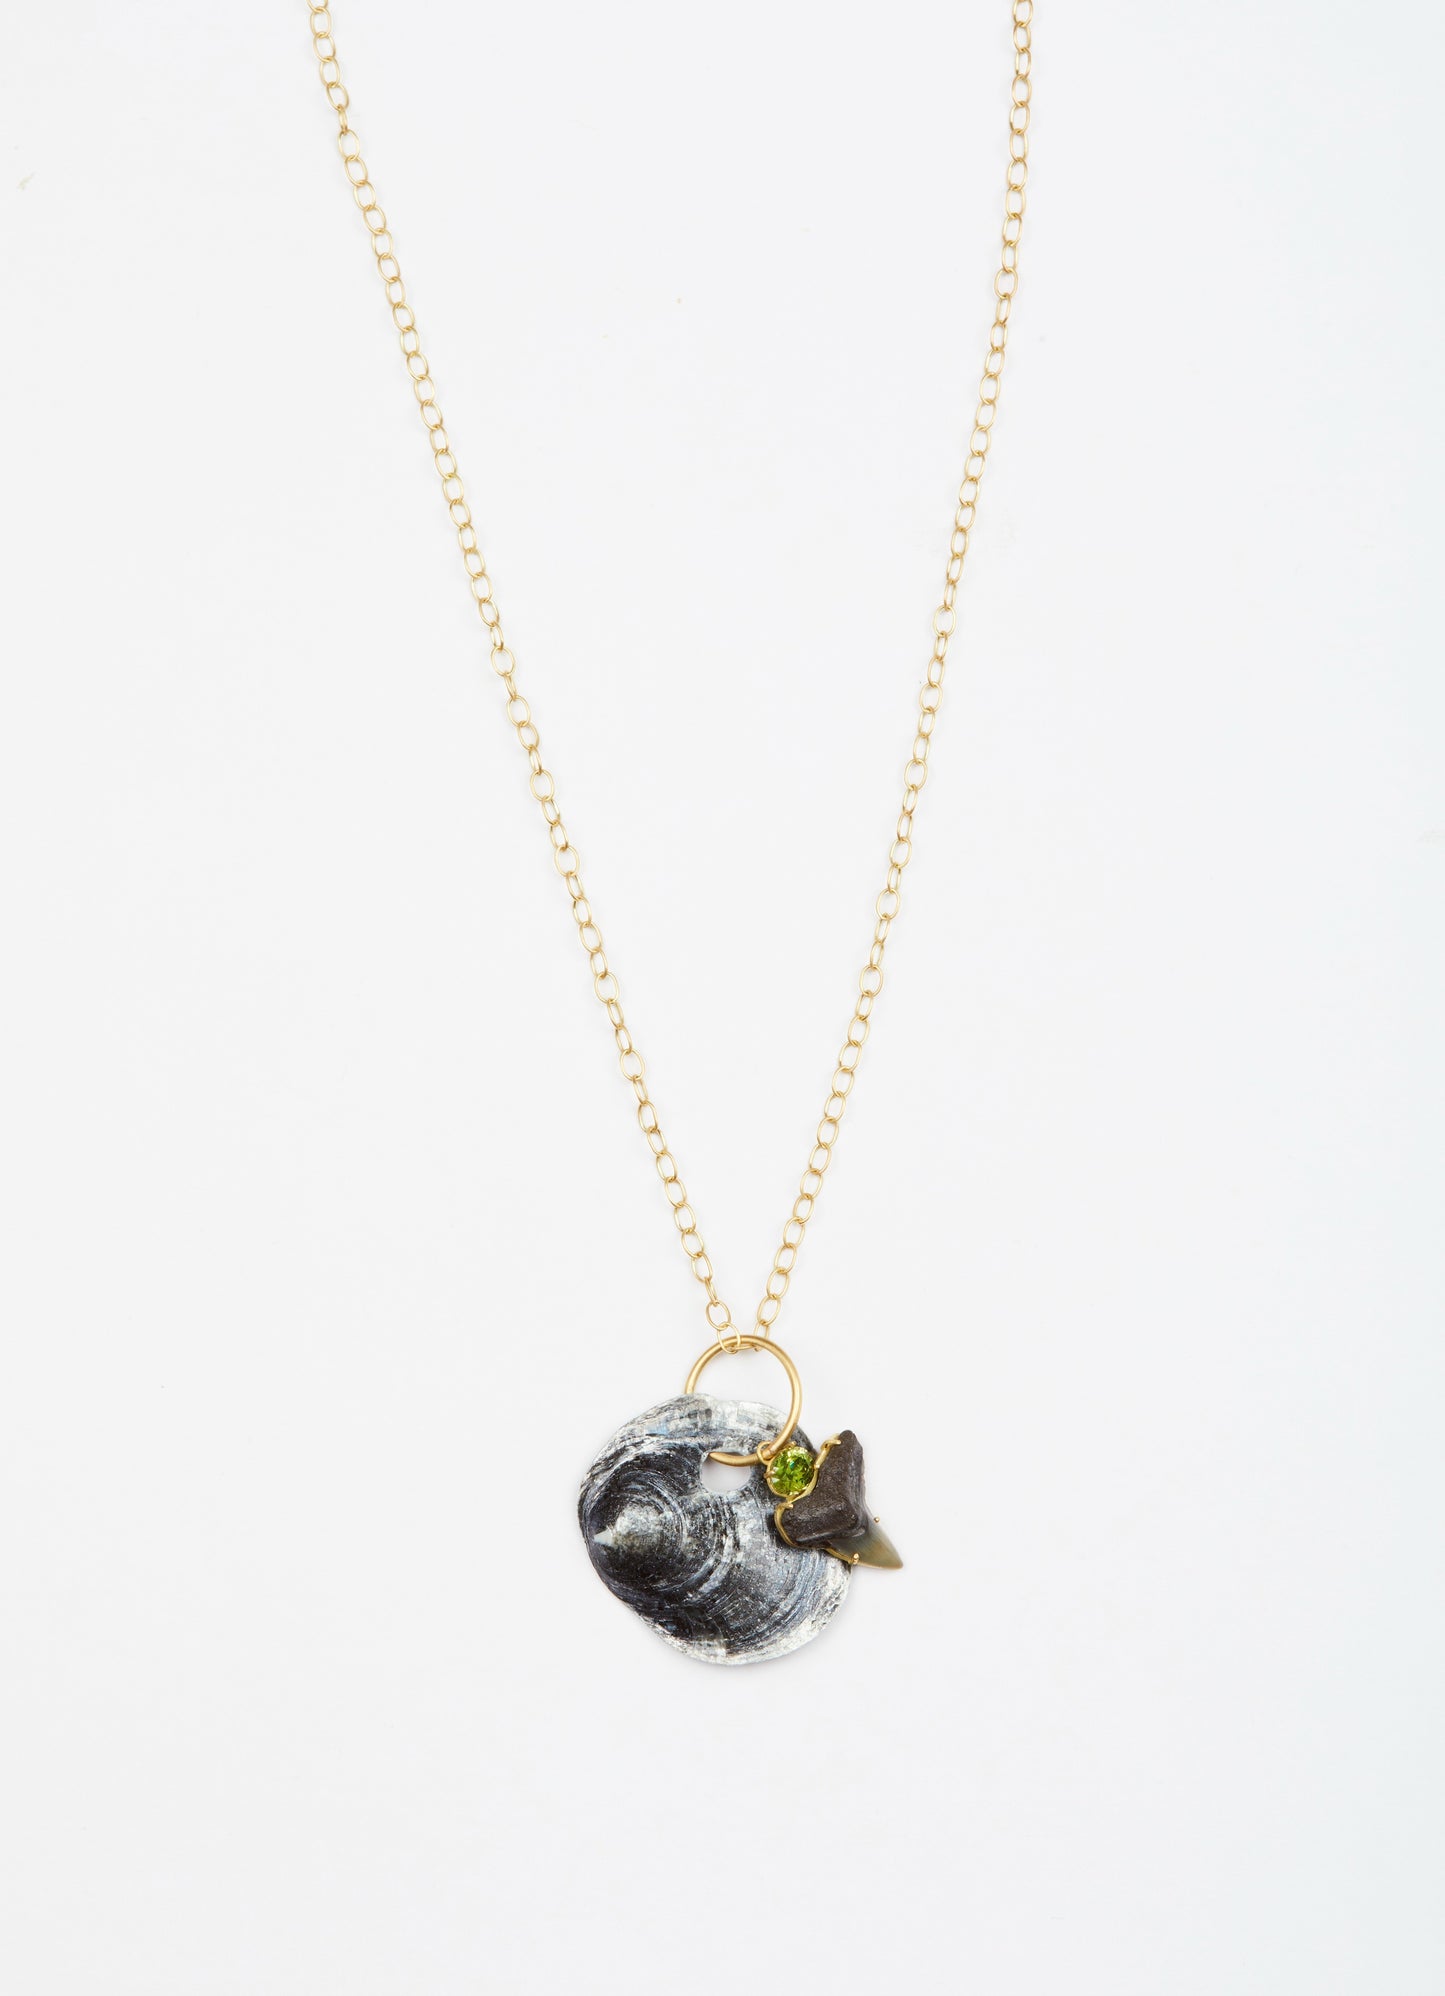 Gold Link Chain with Black Shell, Shark Tooth and Sphene